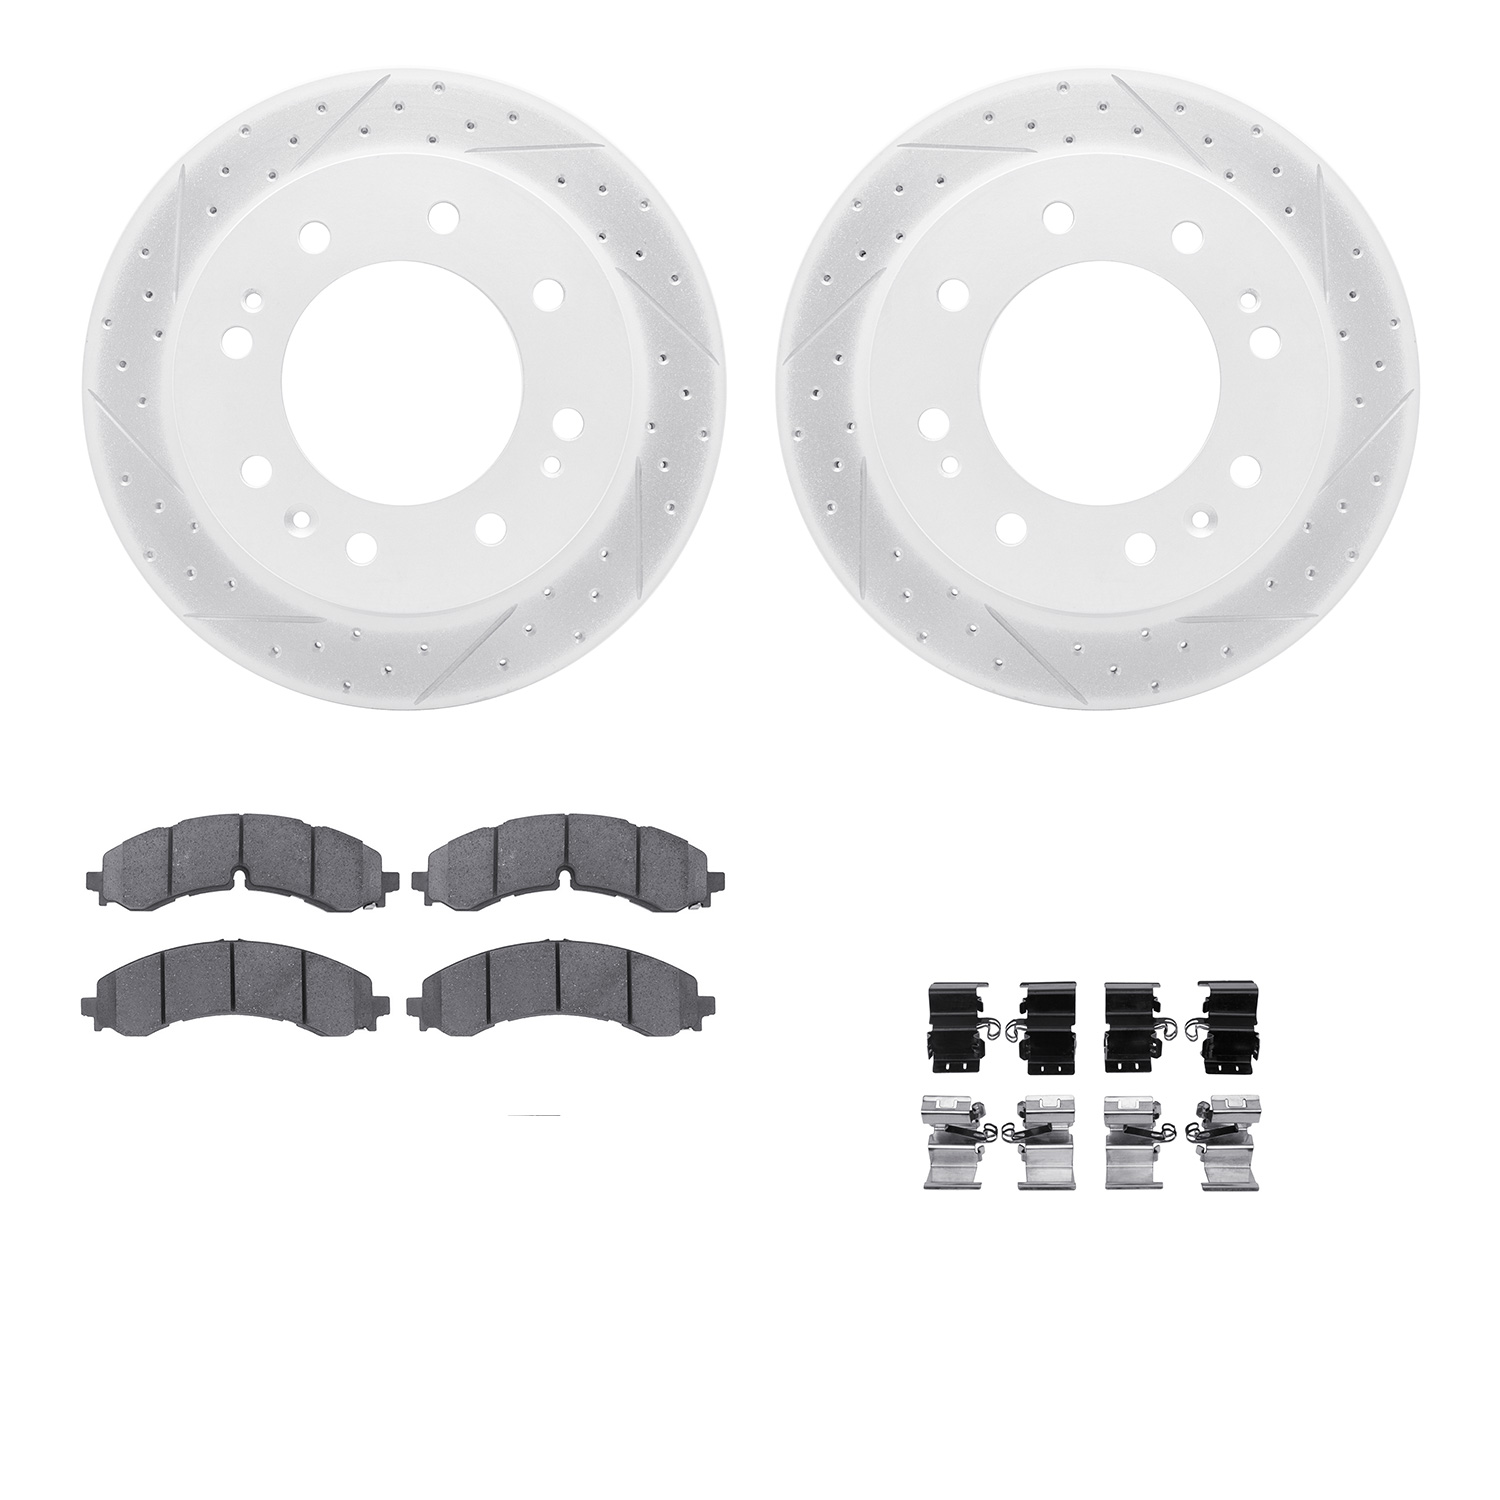 2512-48041 Geoperformance Drilled/Slotted Rotors w/5000 Advanced Brake Pads Kit & Hardware, Fits Select GM, Position: Front